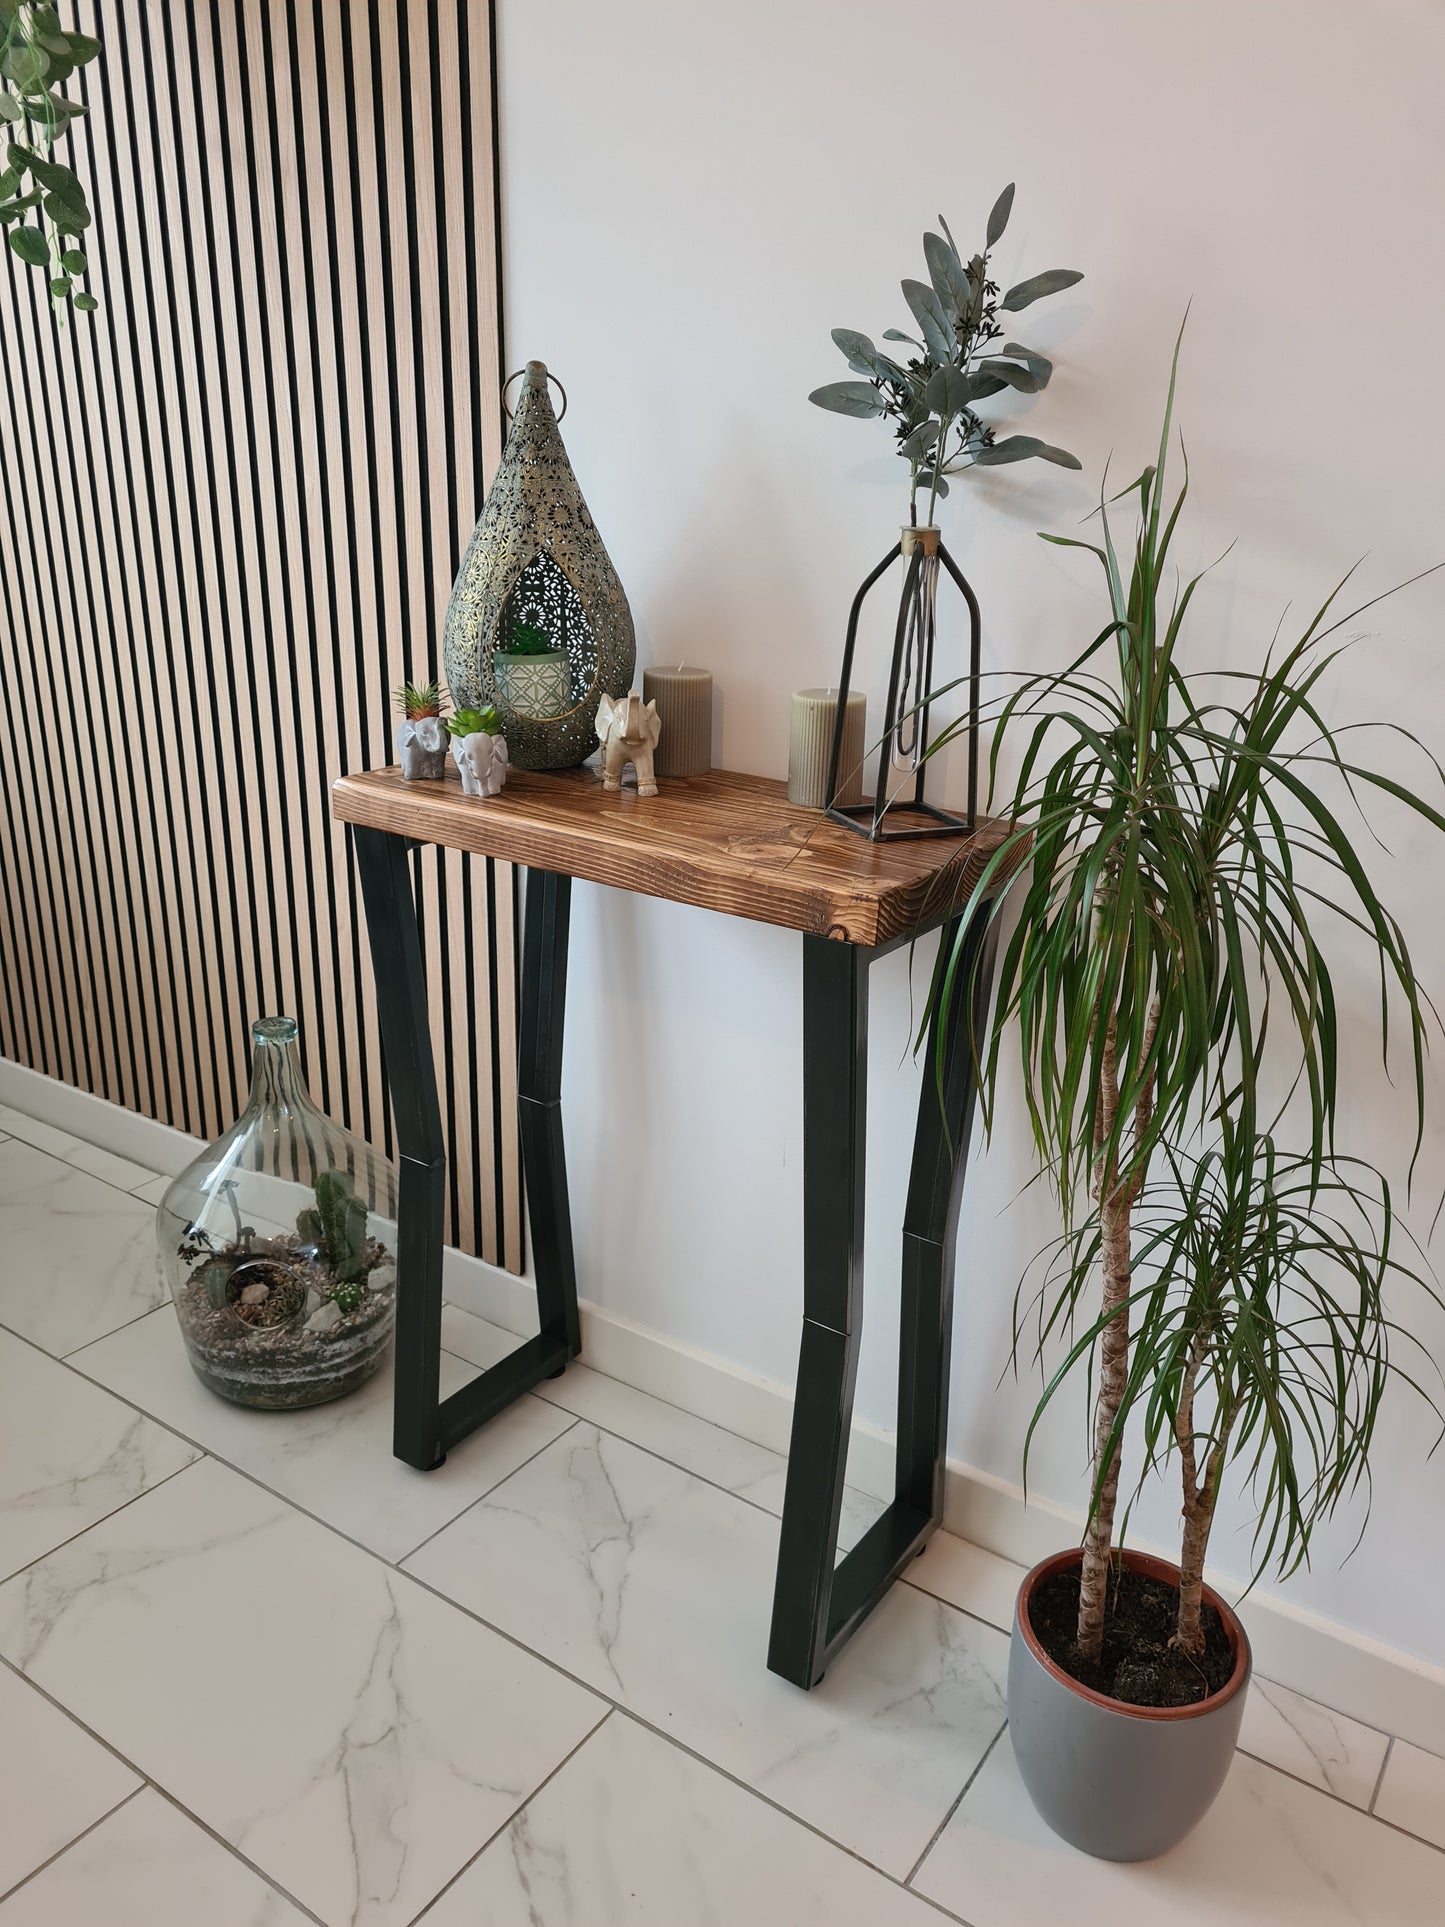 Console Table - Industrial Rustic